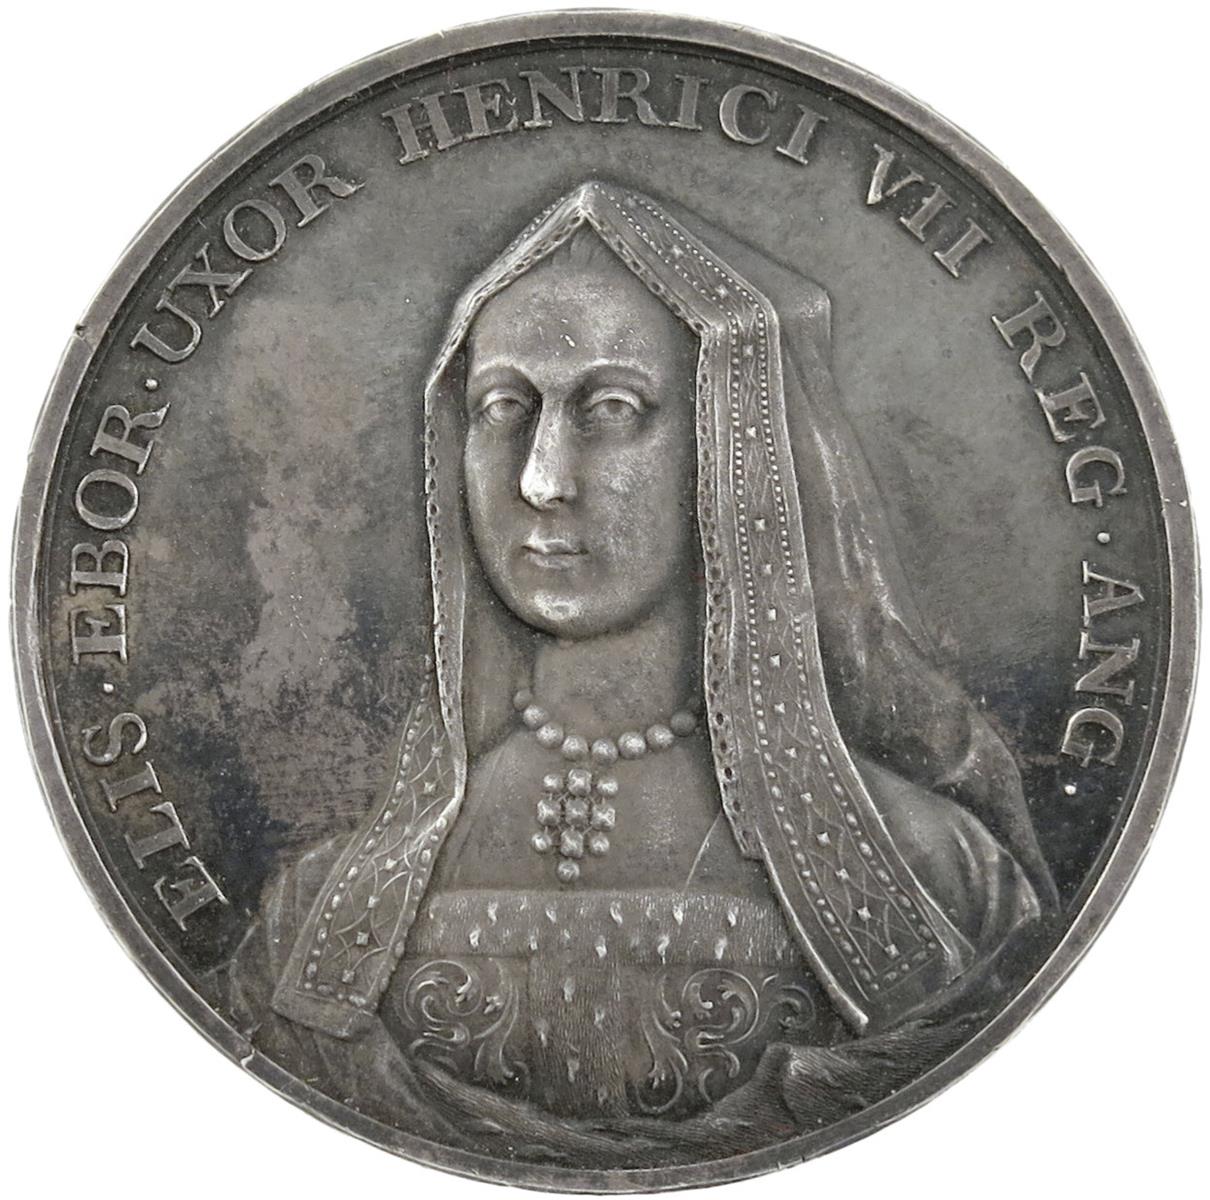 Elizabeth of York (1466-1503), Queen of England, silver medal of German manufacture, by Loos, bust